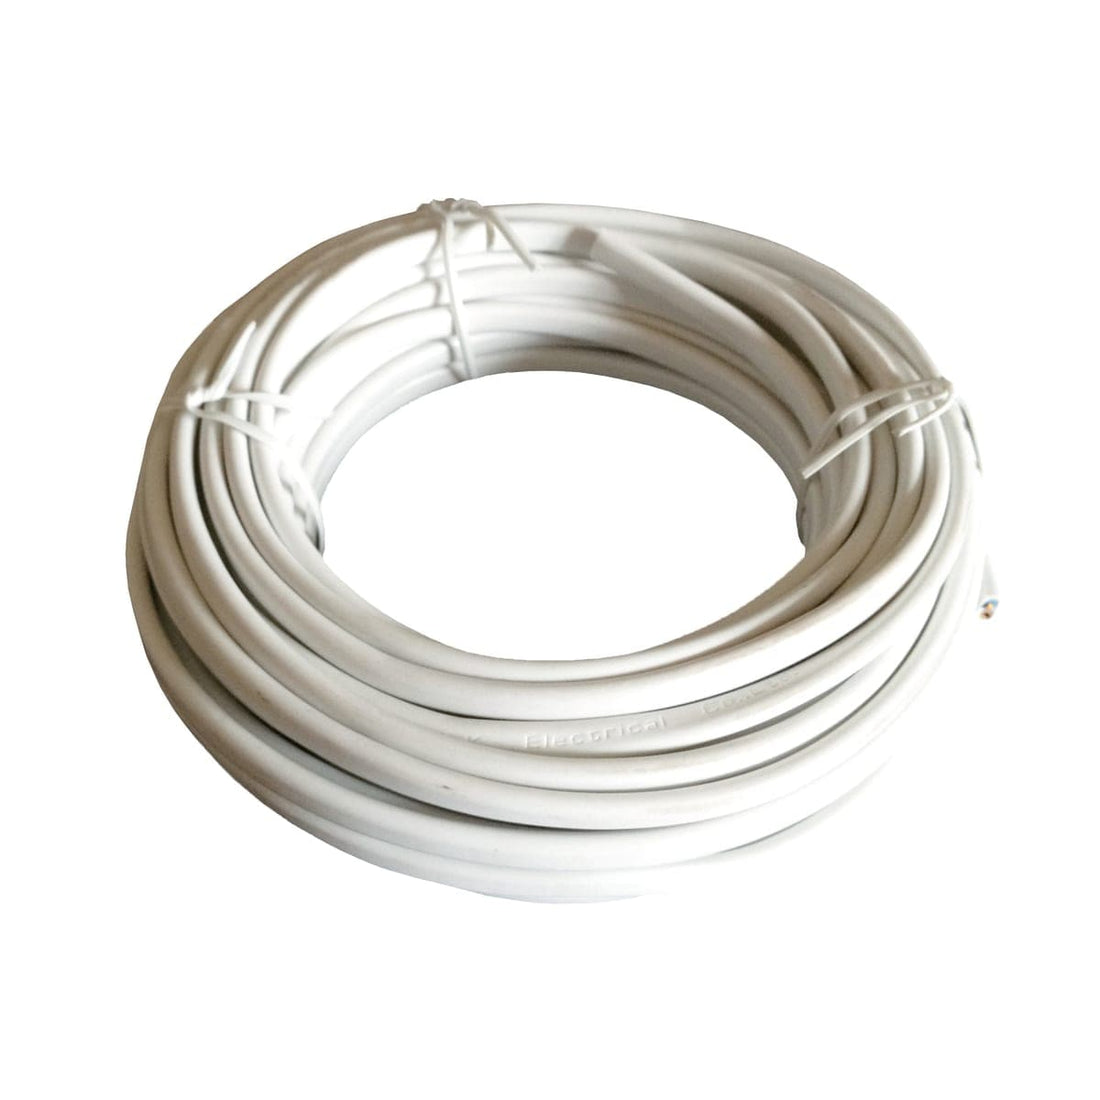 HANK ELECTRICAL CABLE H03VVH2-F 2X0.7510 M WHITE - best price from Maltashopper.com BR420202040